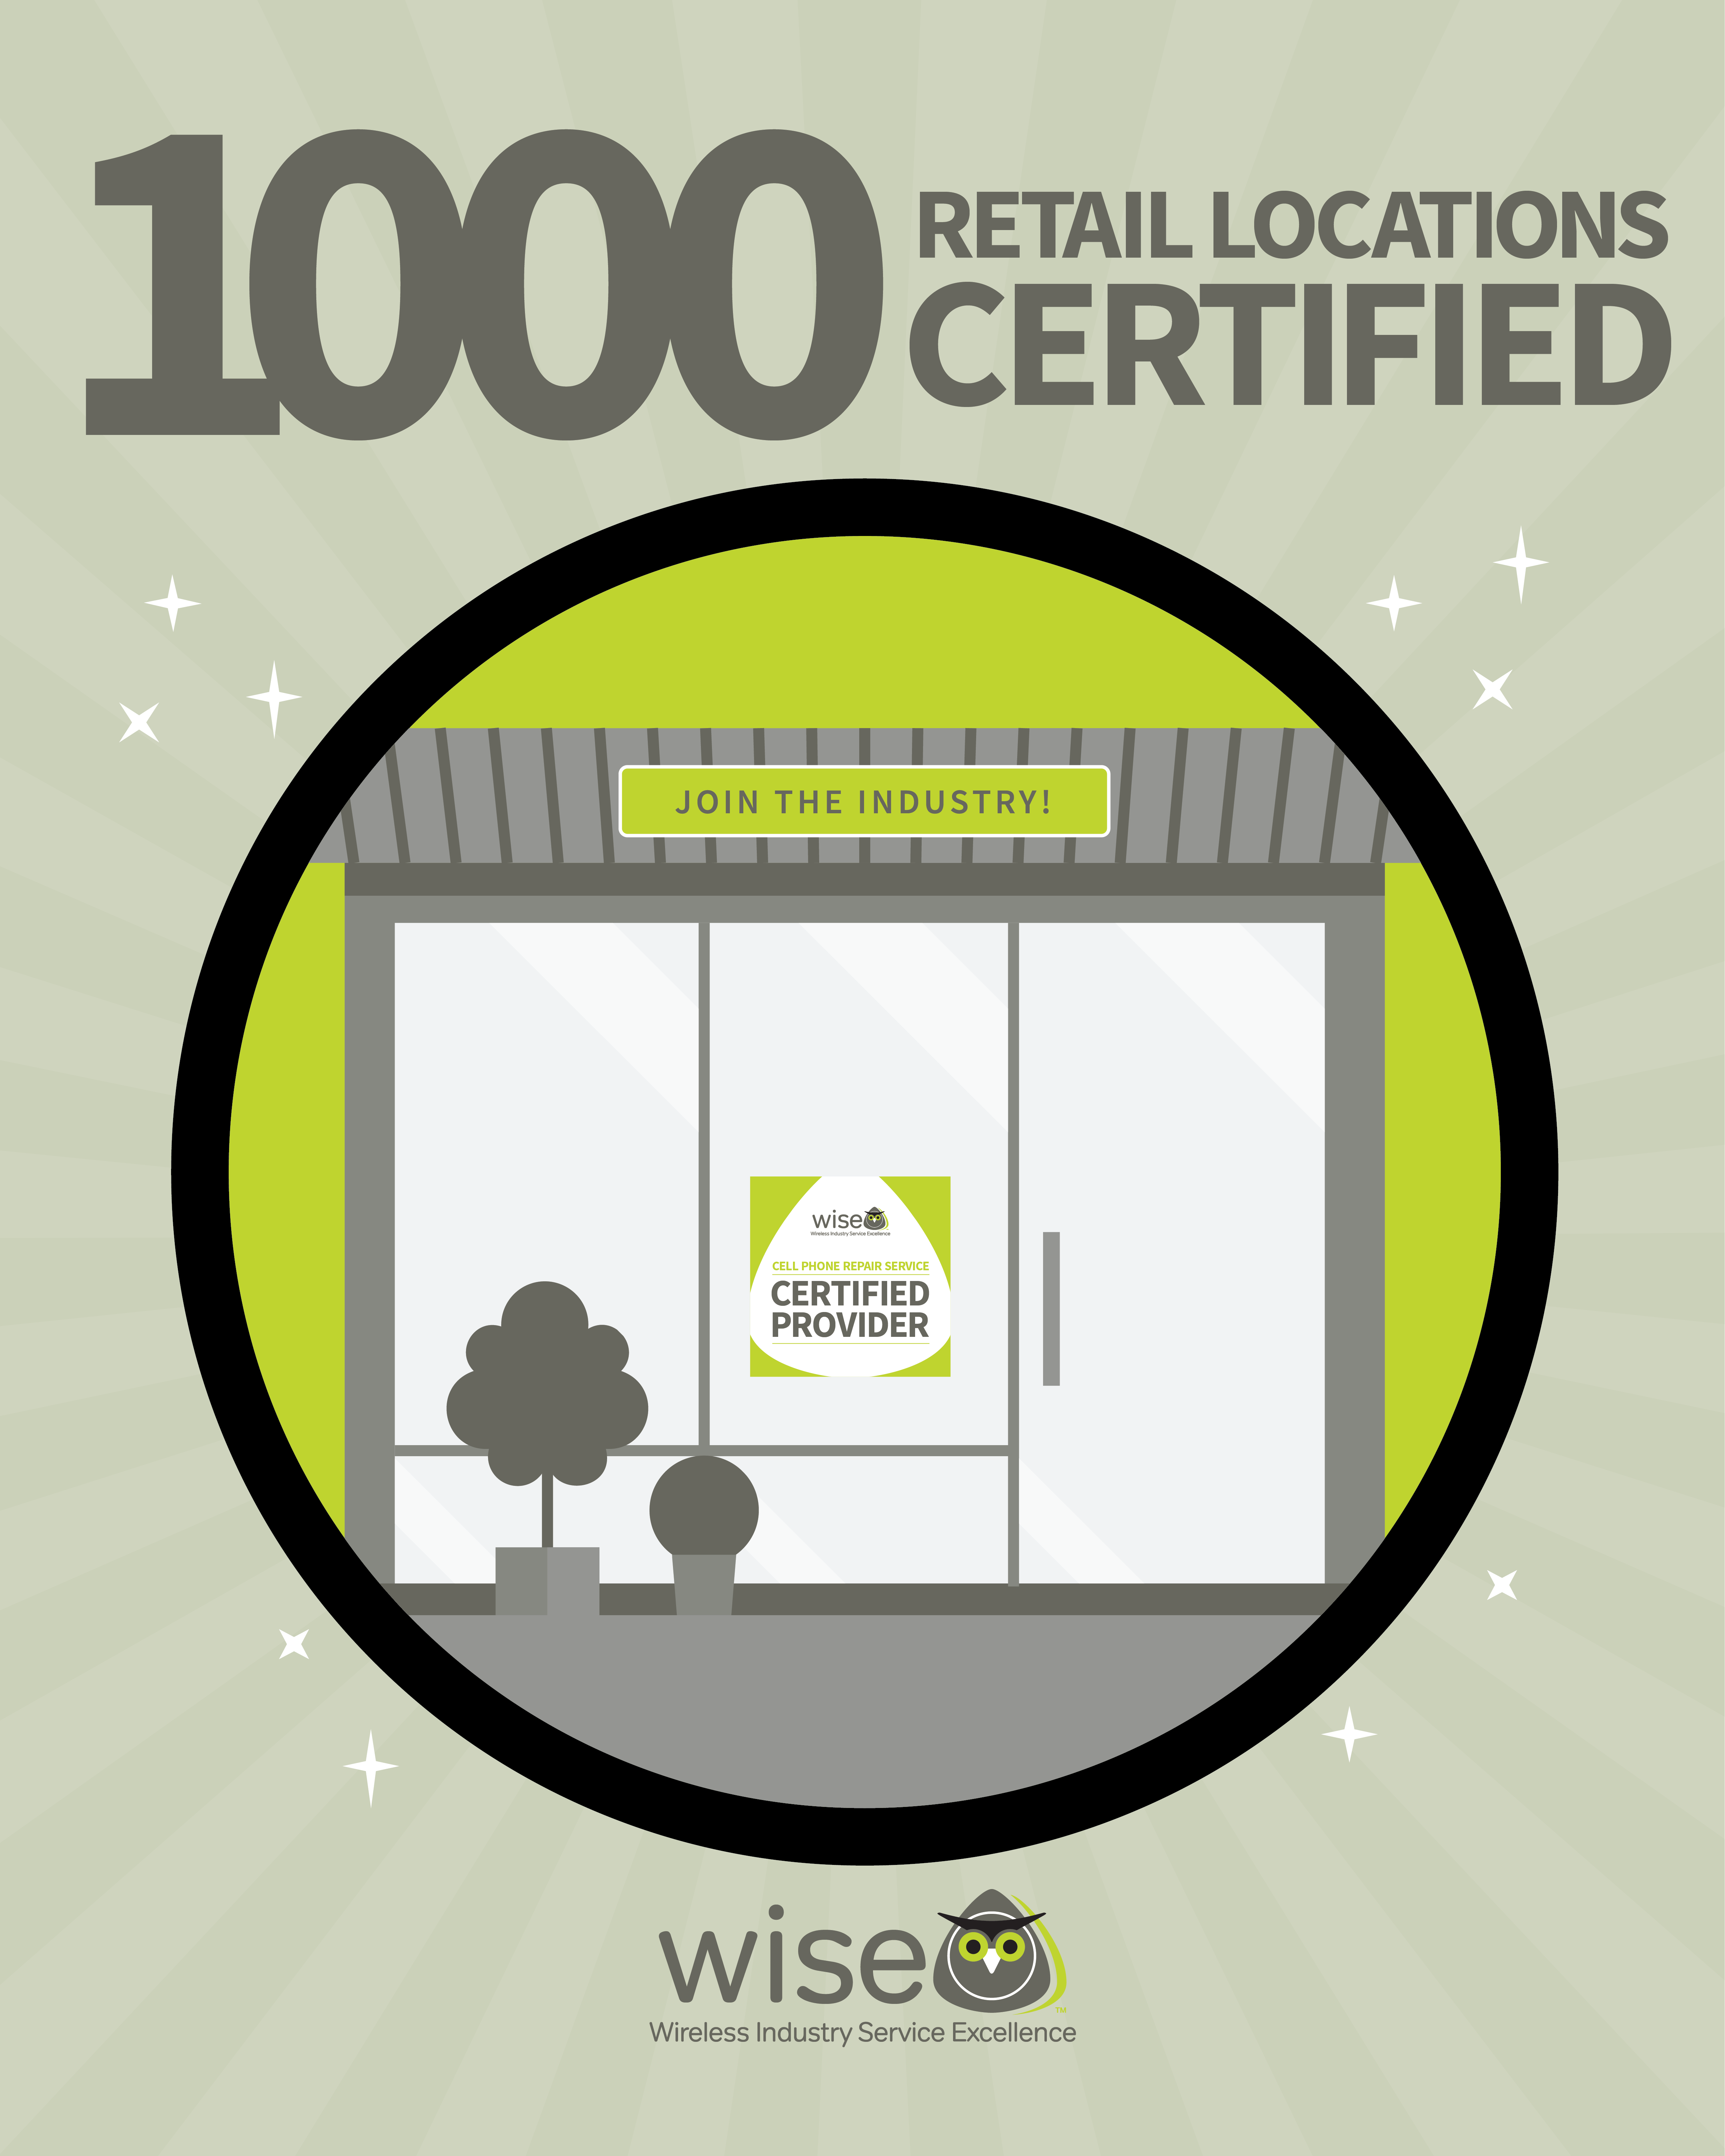 WISE Certification 1000 Retail Locations Certified 2508design Digital